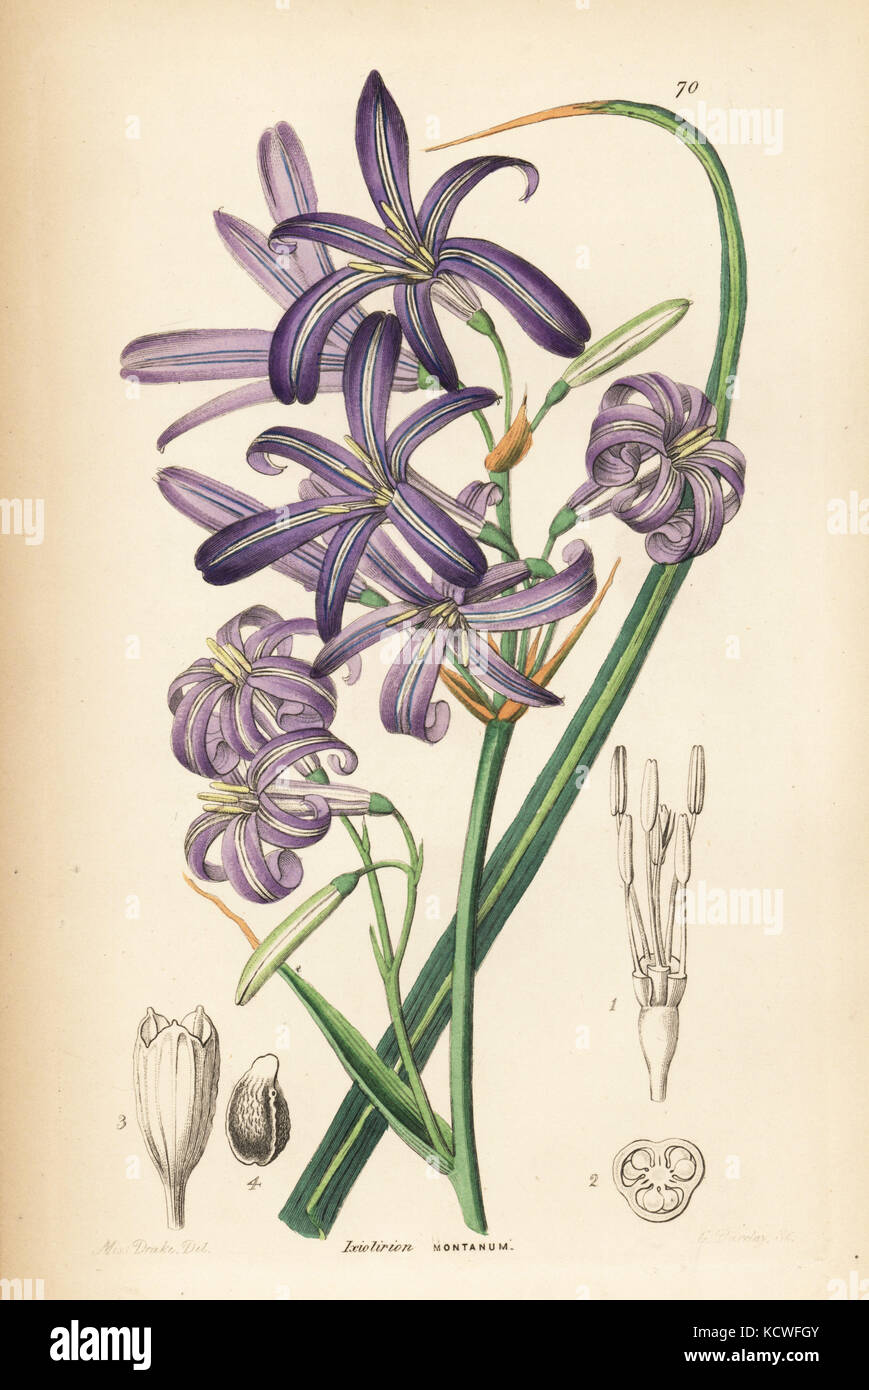 Siberian lily or lavender mountain lily, Ixiolirion tataricum (Mountain ixia-lily, Ixiolirion montanum). Handcoloured copperplate engraving by G. Barclay after Miss Sarah Drake from John Lindley and Robert Sweet's Ornamental Flower Garden and Shrubbery, G. Willis, London, 1854. Stock Photo